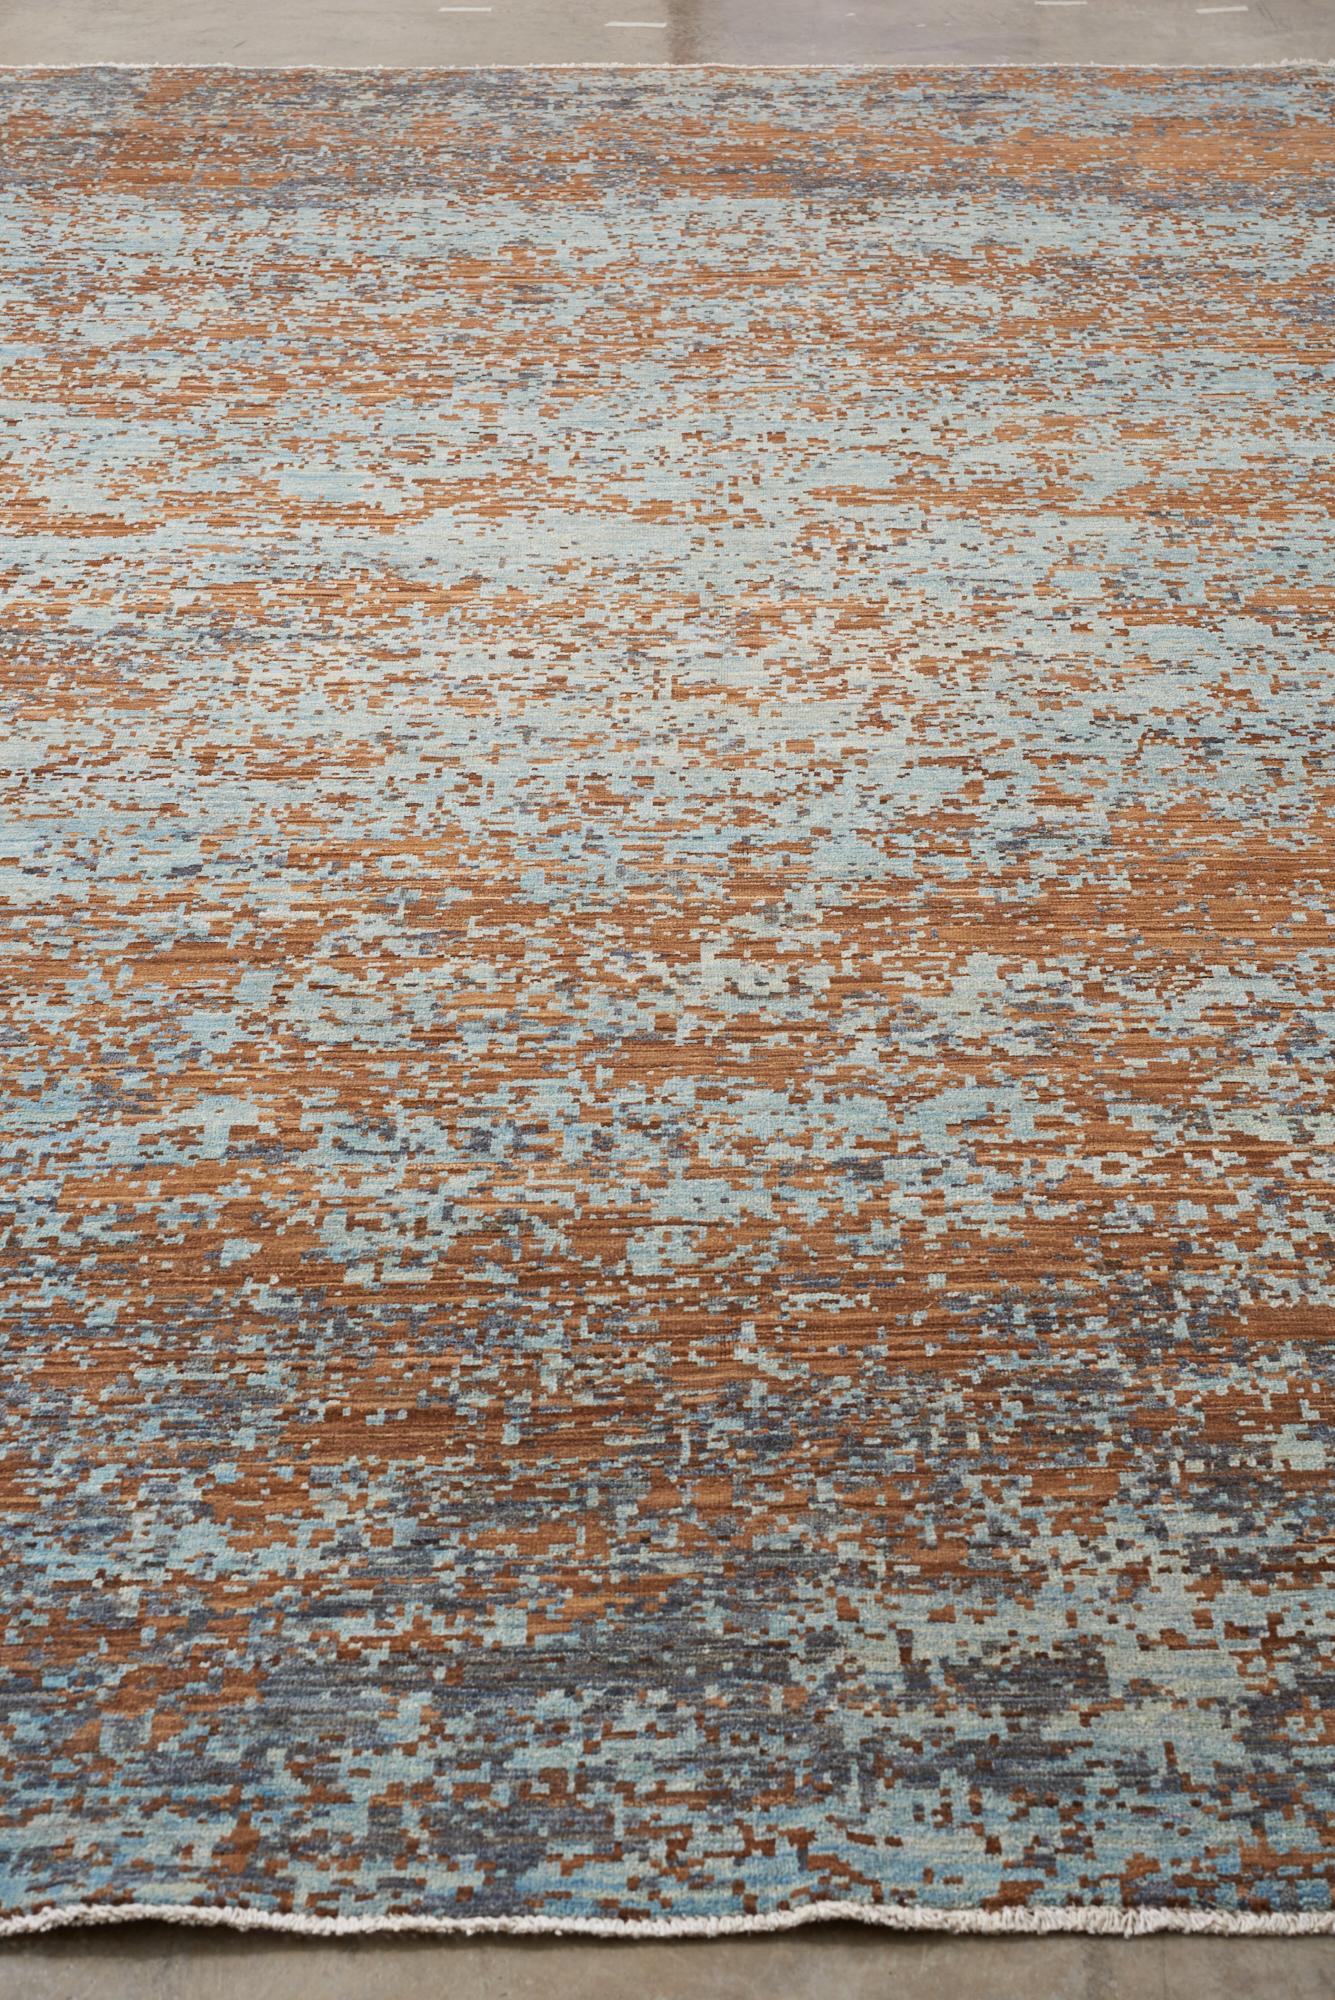 True connoisseurs know that certain things become more beautiful with age; a shift in color, a change in texture are the natural results of an item being truly loved. The rugs in the Patina collection capture the look of a cherished object by taking